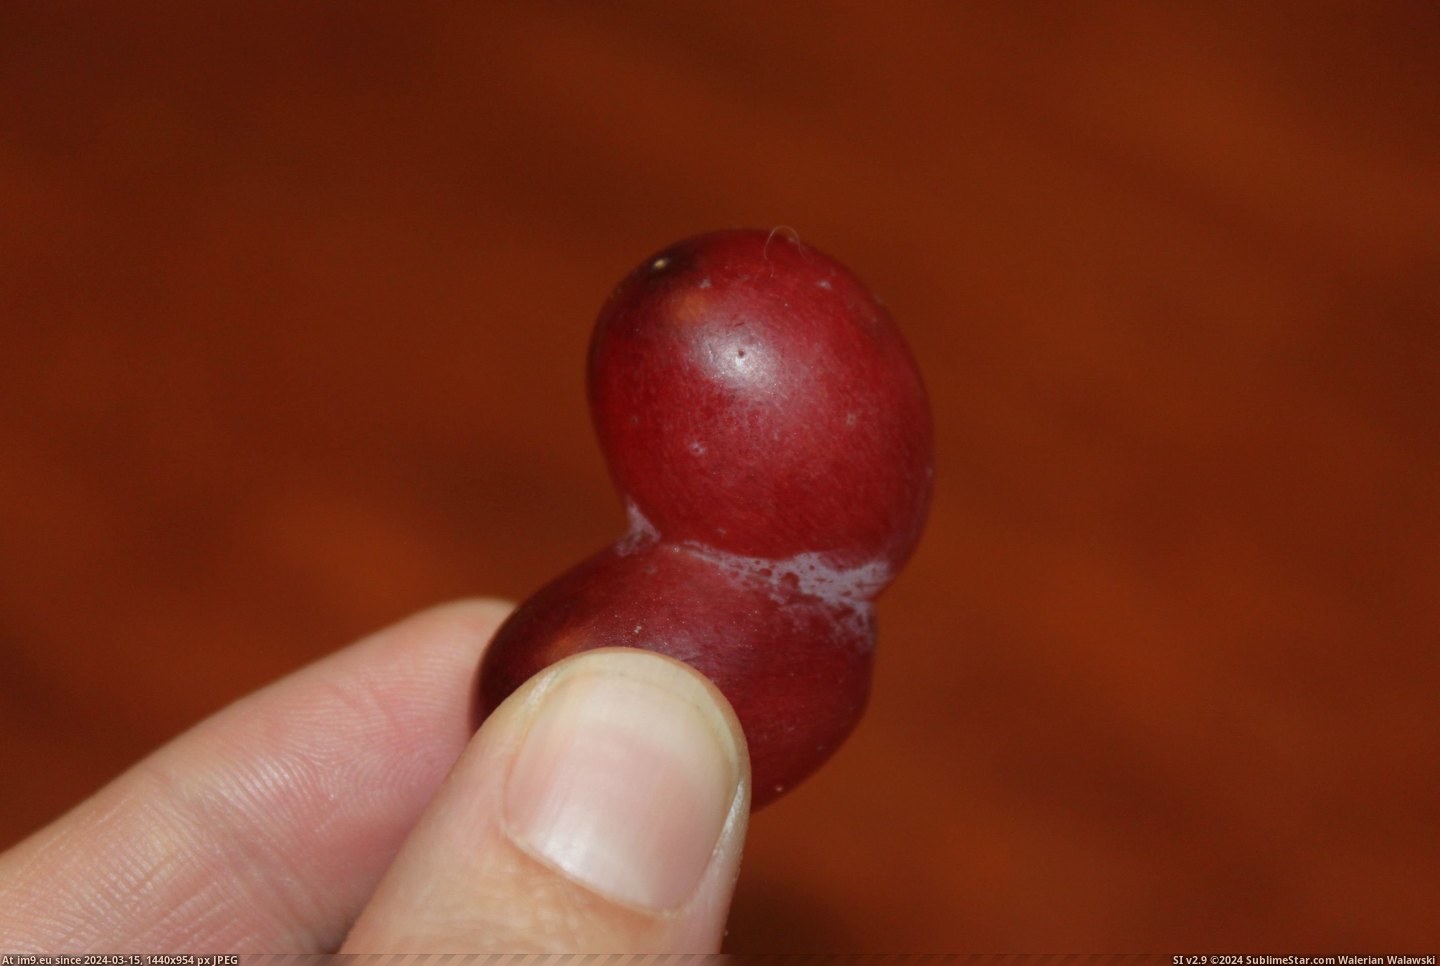 #Grapes  #Conjoined [Mildlyinteresting] I found conjoined grapes. 3 Pic. (Bild von album My r/MILDLYINTERESTING favs))